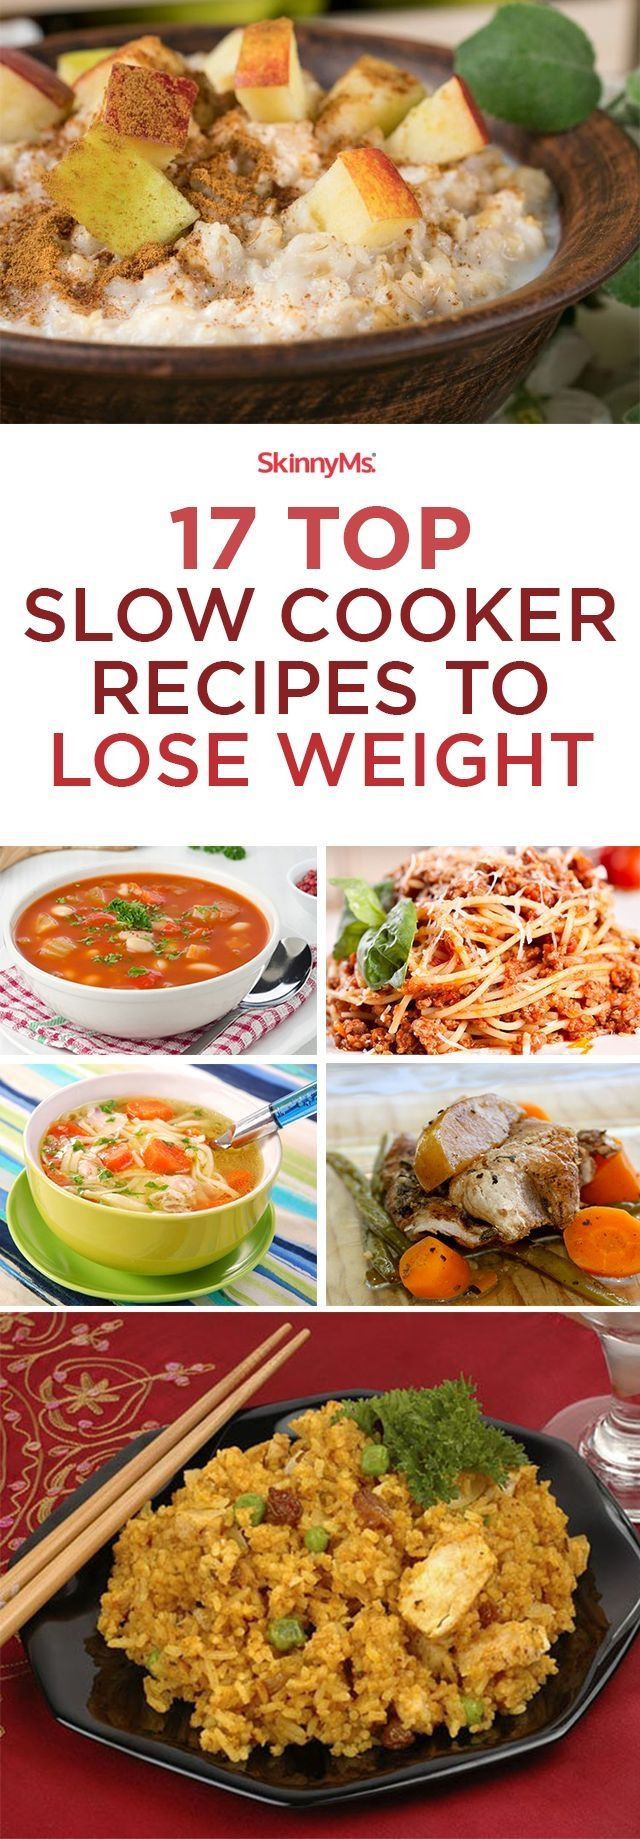 Low Fat Slow Cooker Recipes Weight Watchers
 510 best images about Low Fat Weight Watchers on Pinterest